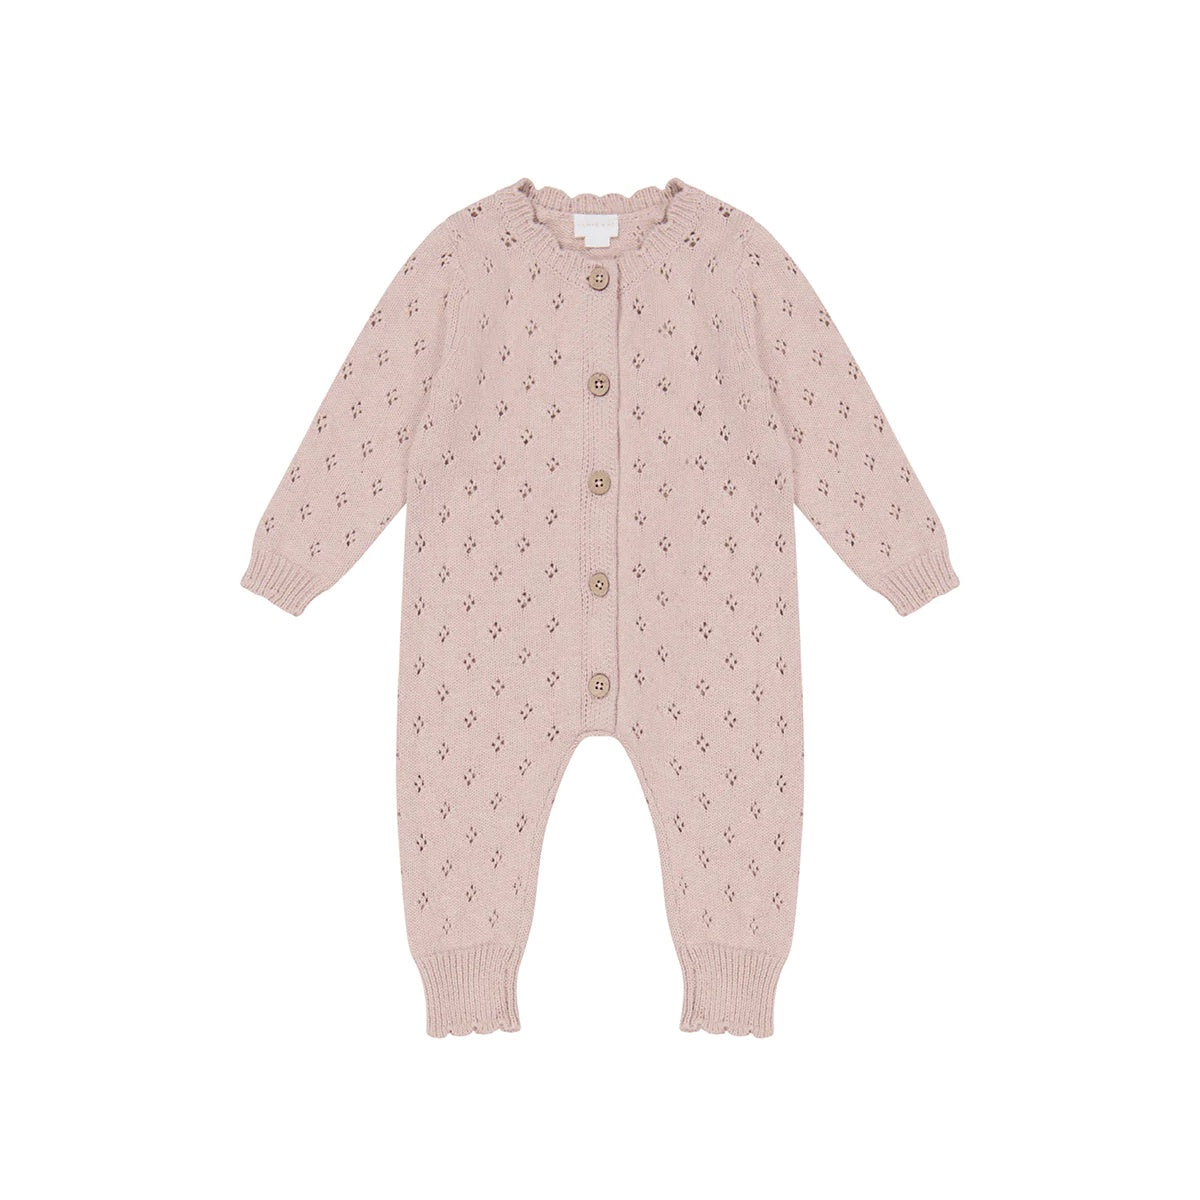 Emily Knitted Onepiece - Ballet Pink Marle